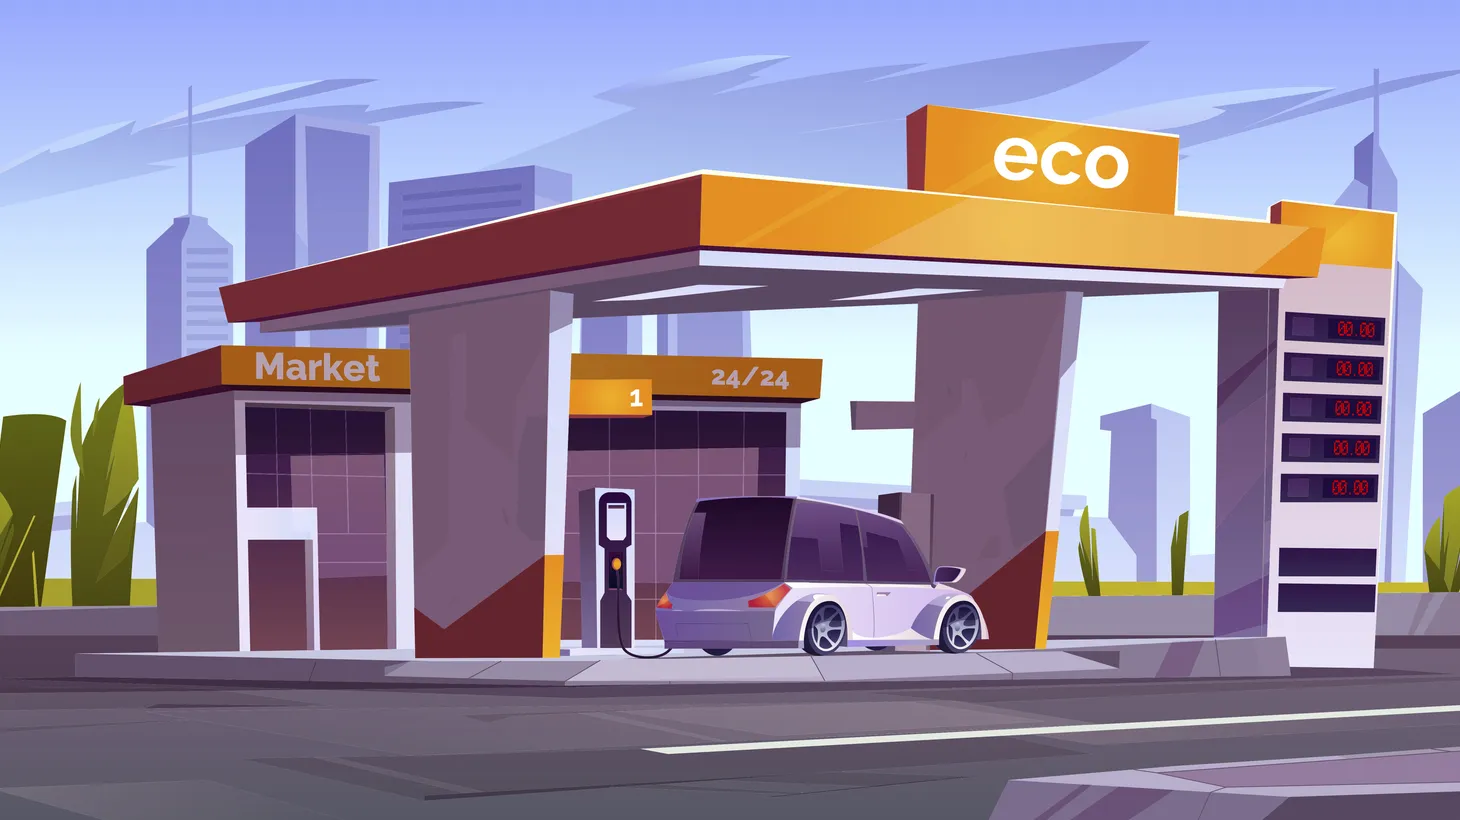 An illustration shows an electric charging station with a market.